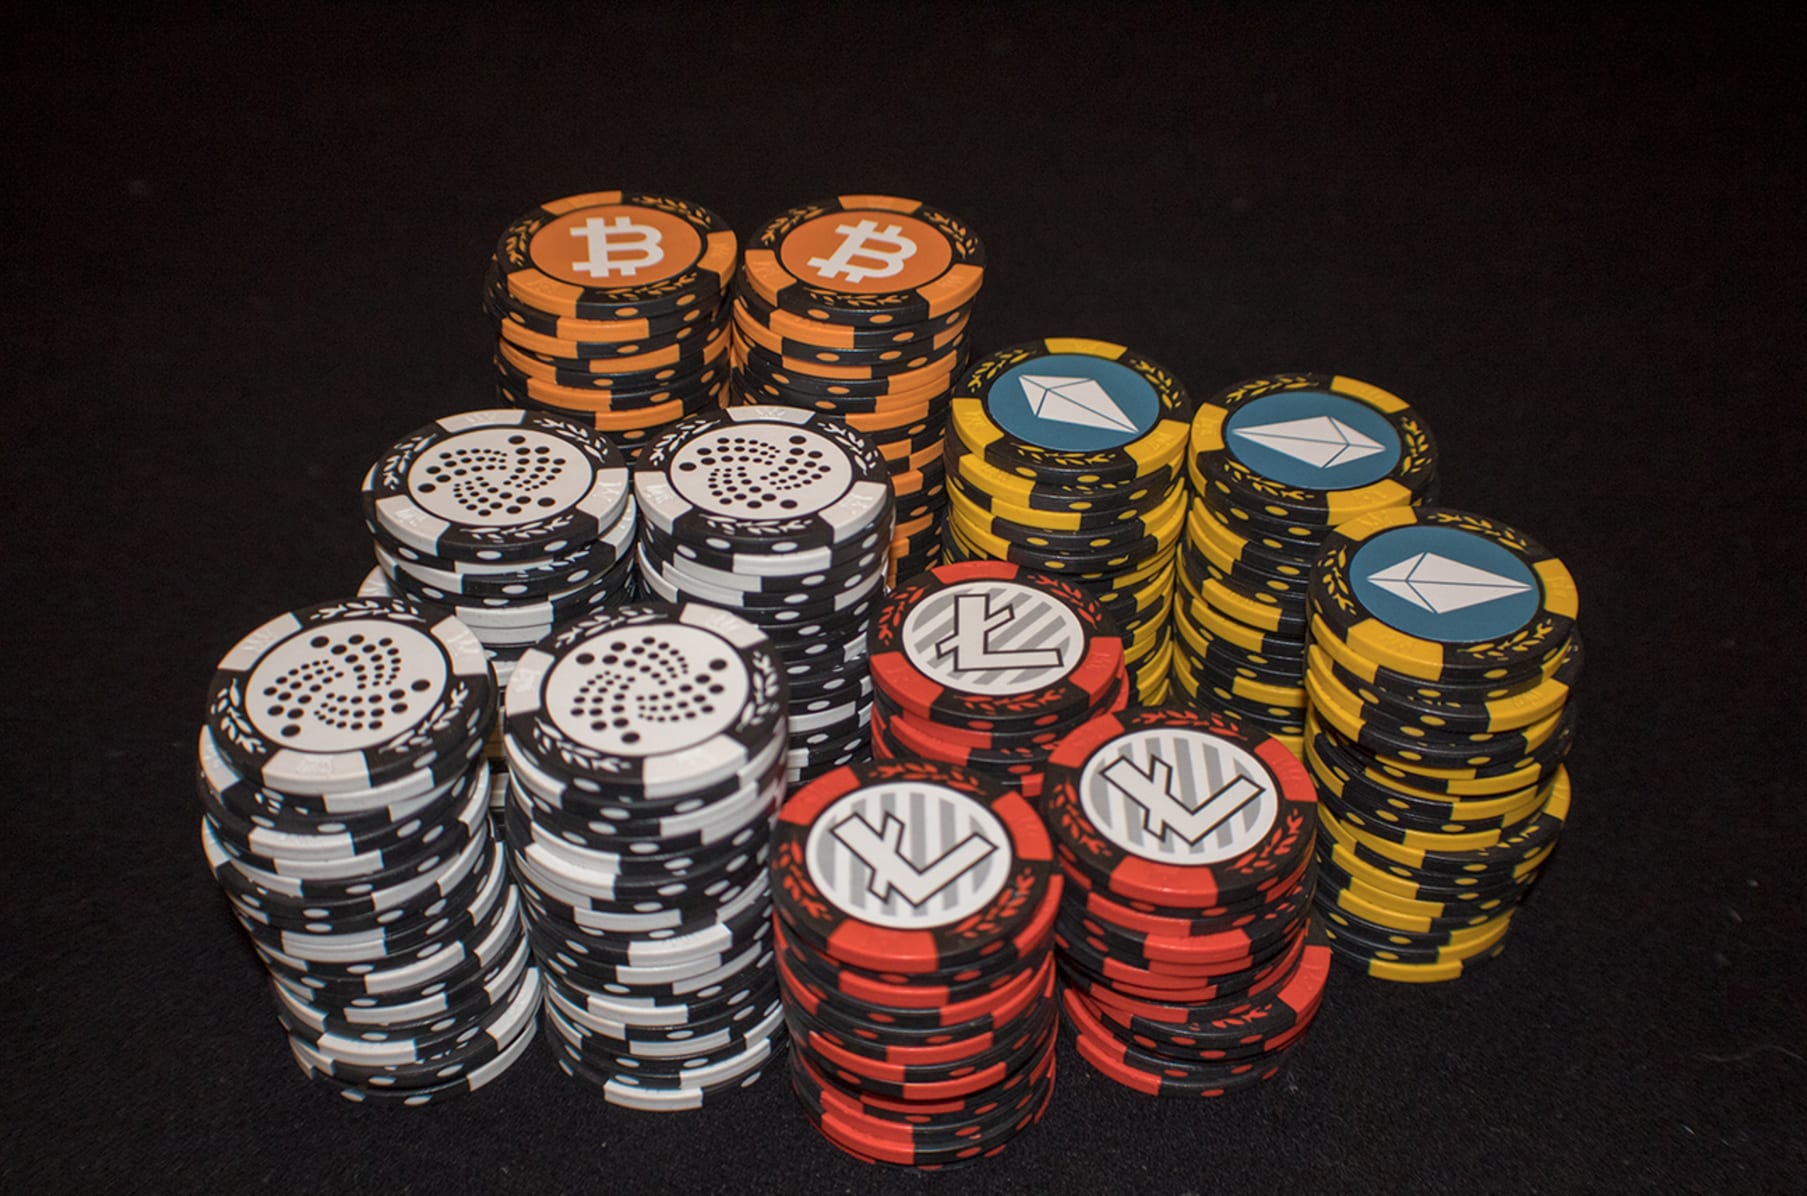 Cryptocurrency Themed Cards Poker Chips | Indiegogo